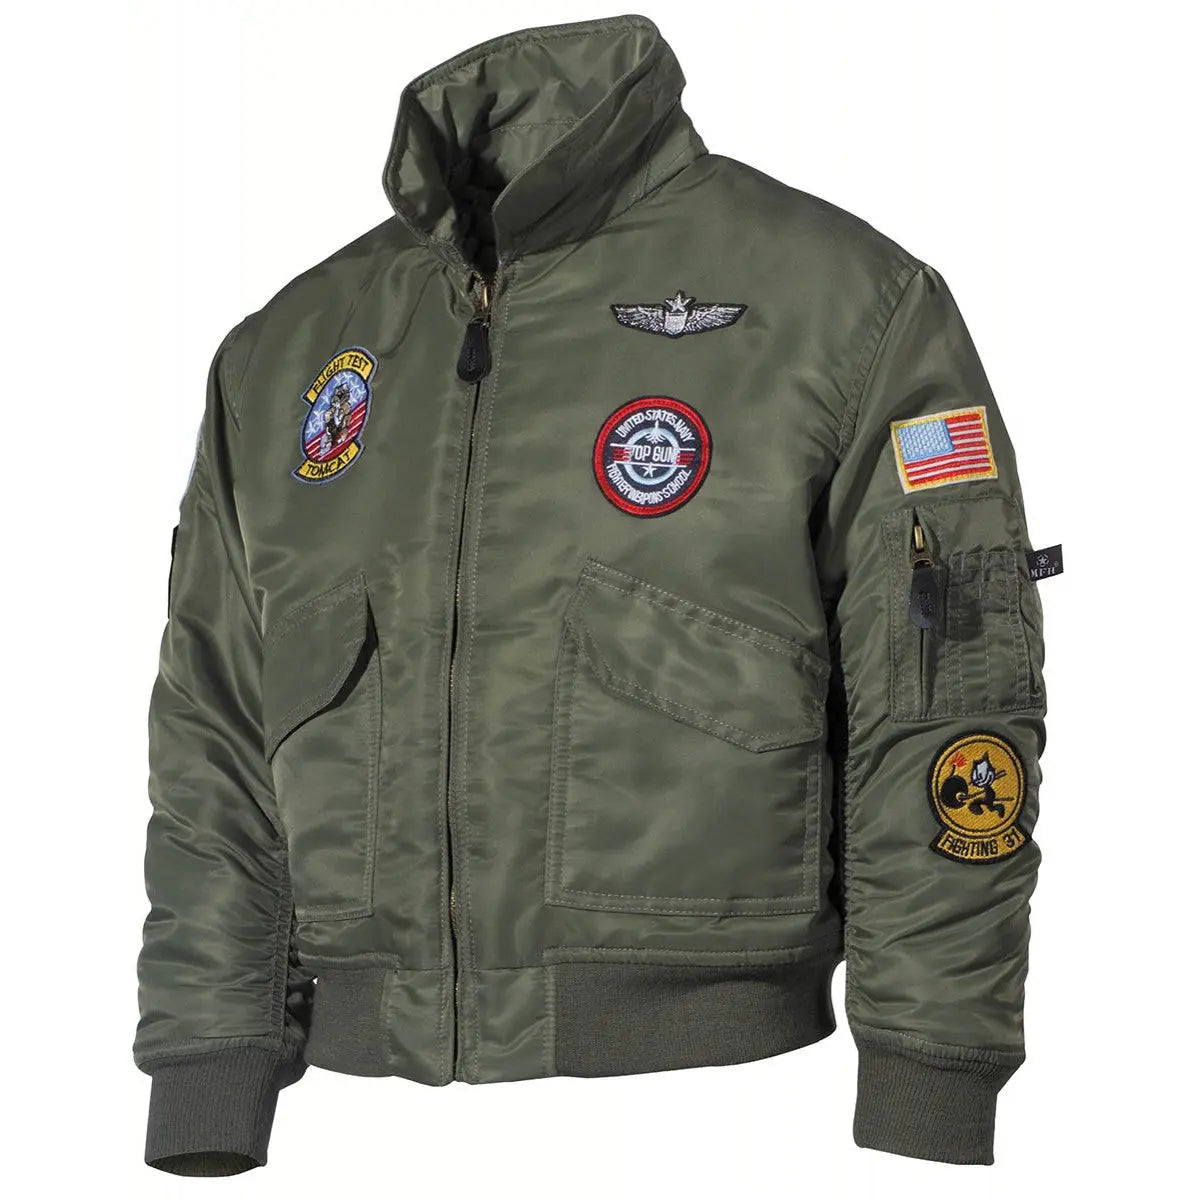 US Kids Pilot Jacket, CWU, OD green, with patches NSO Gear